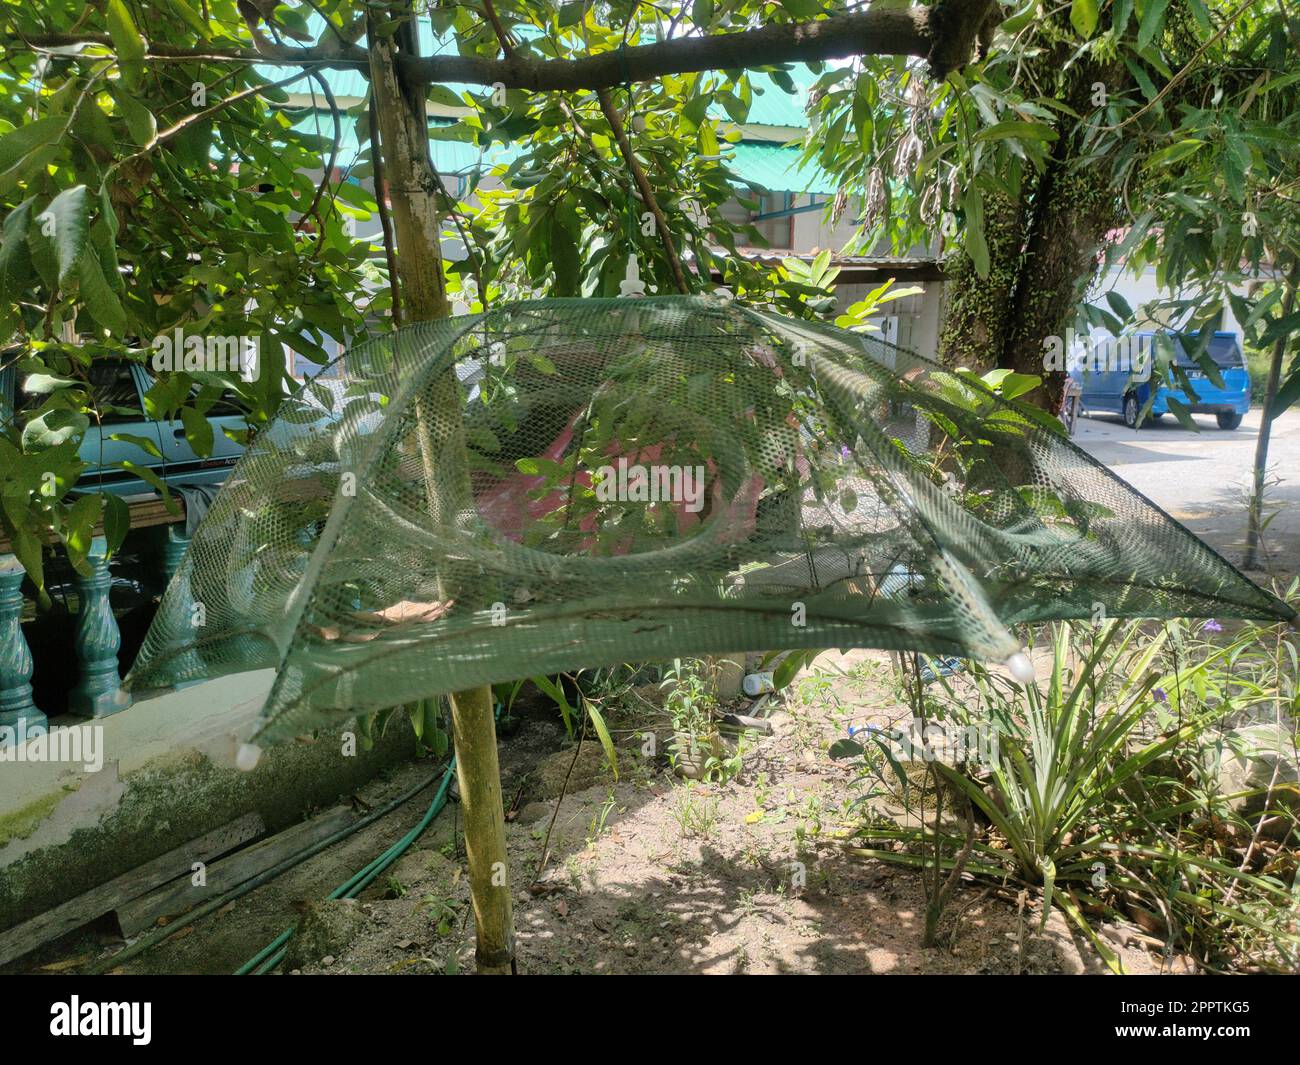 Malaysia, 25 May 2022: Cages for fishing in paddy fields. Stock Photo